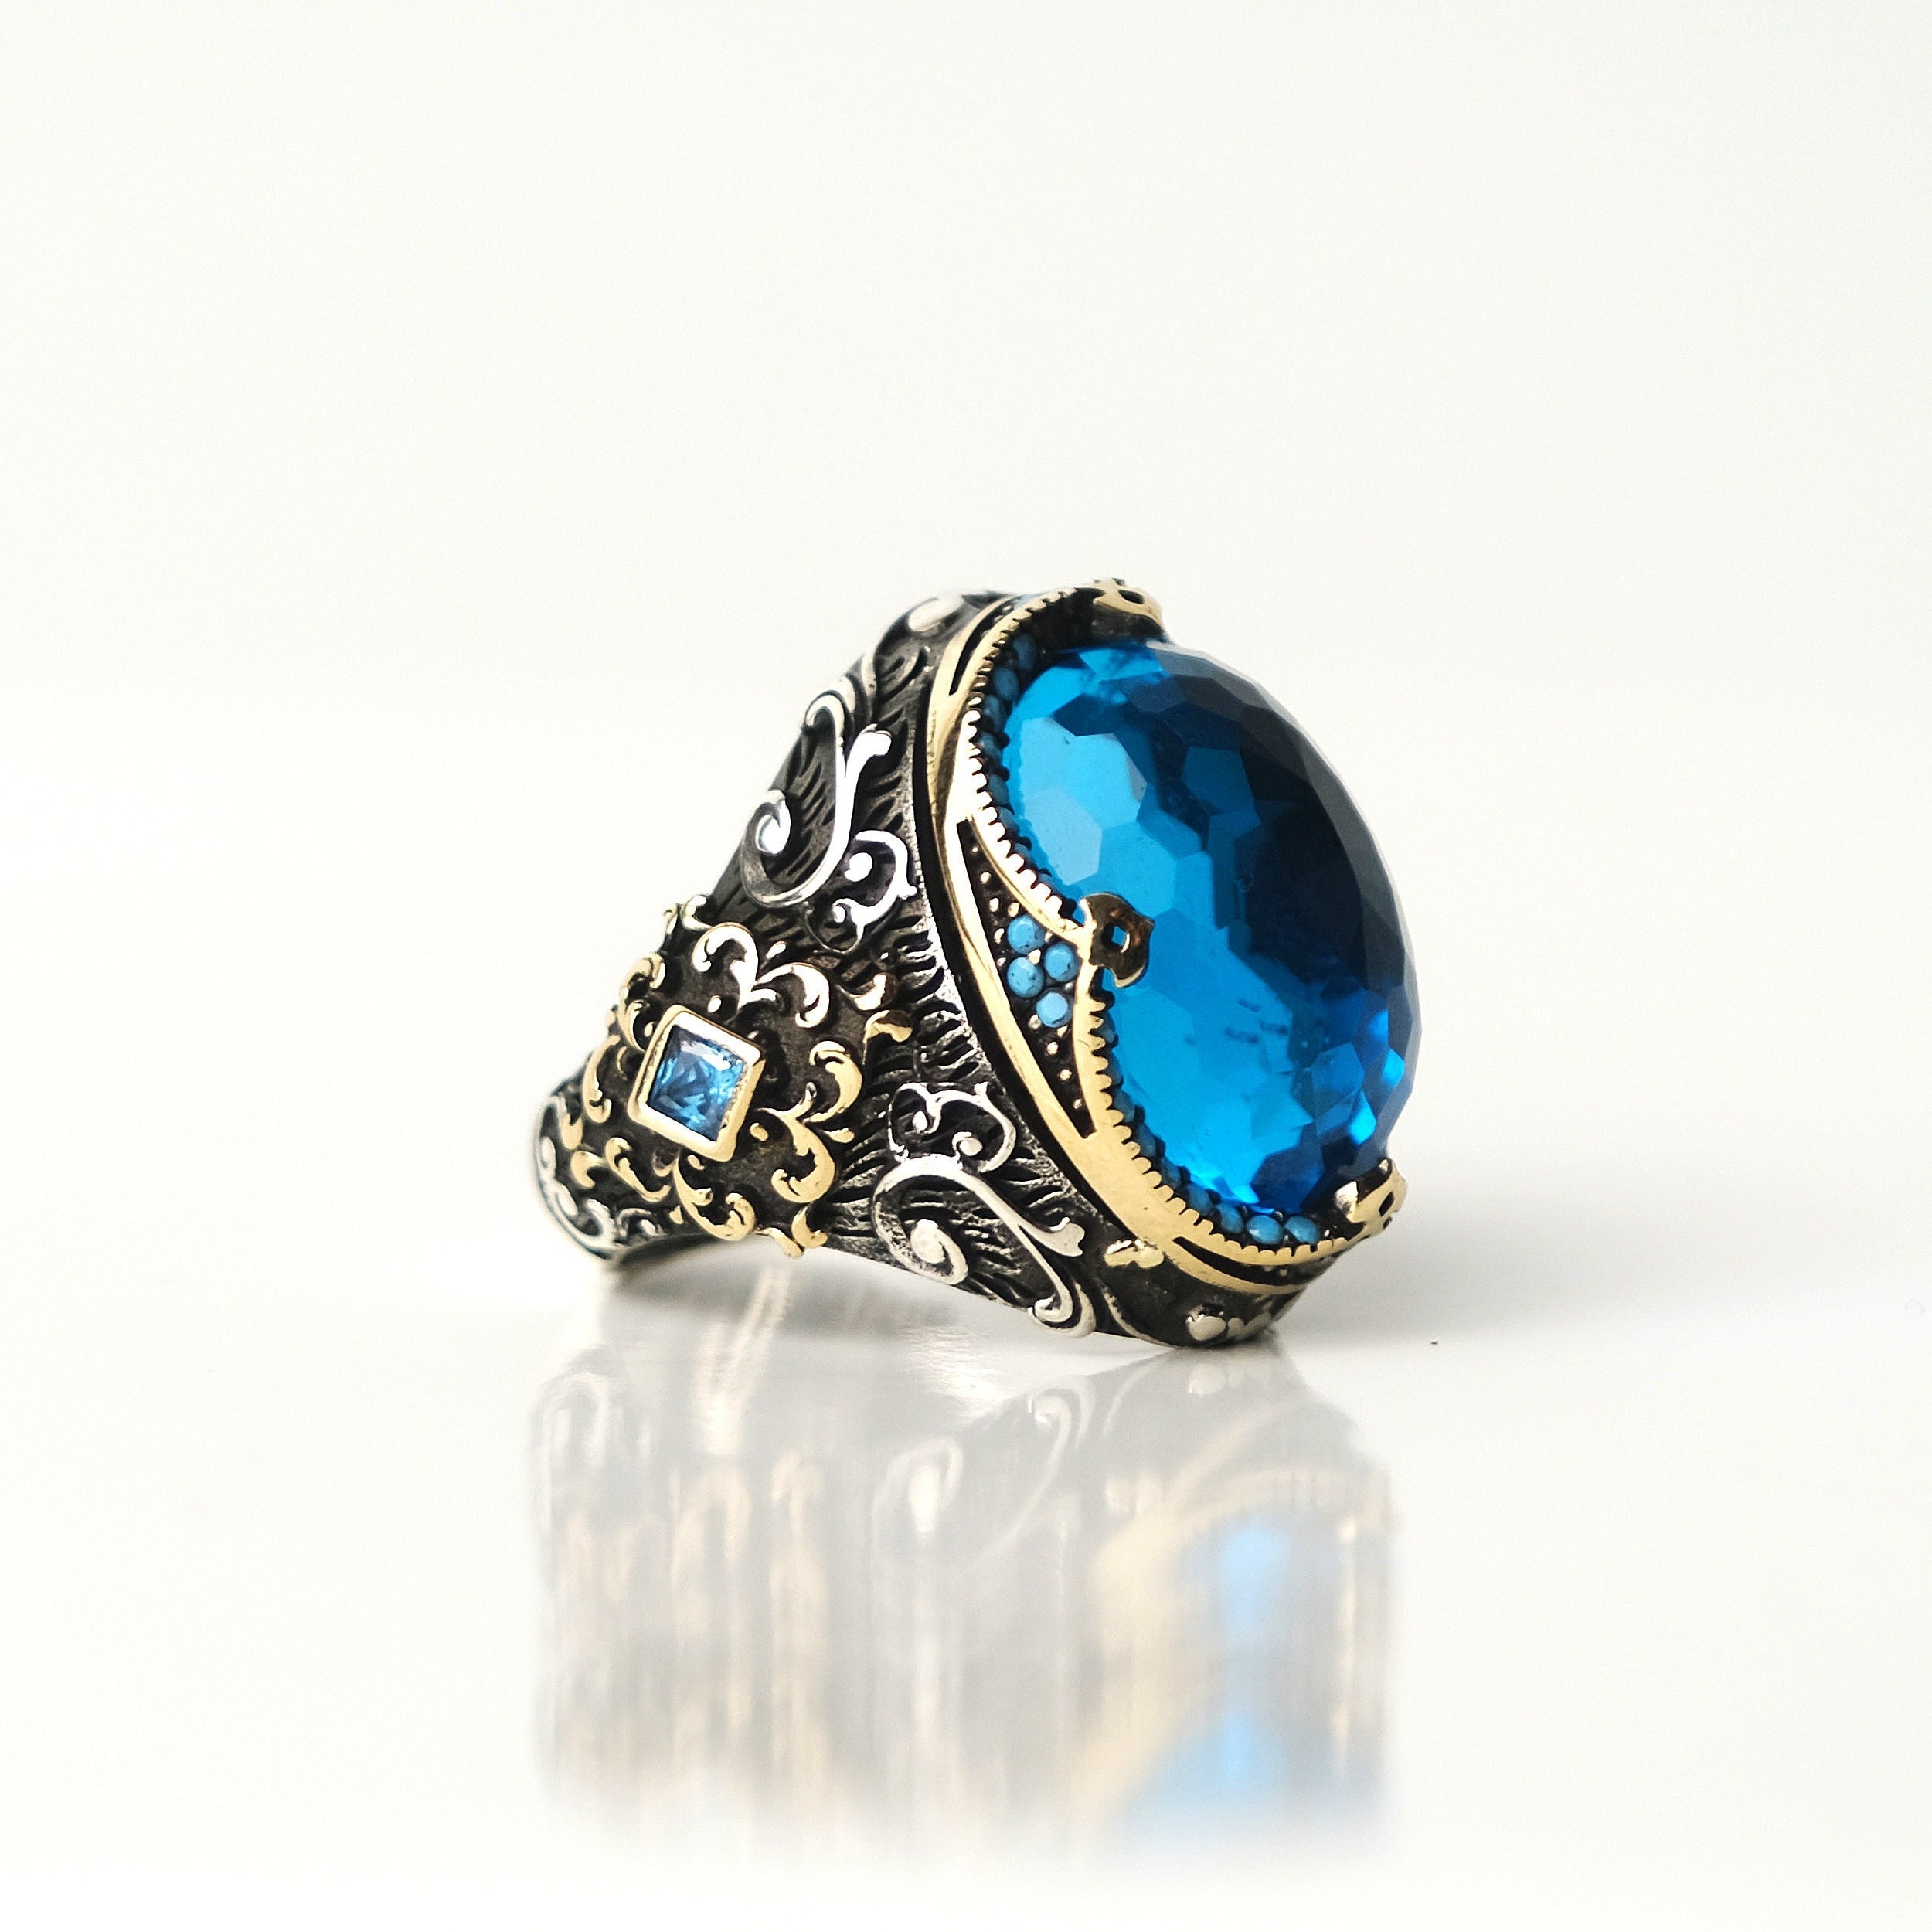 Details about    Men's Ring 925 Sterling Silver Turkish Handmade Jewelry Aquamarine All Size 